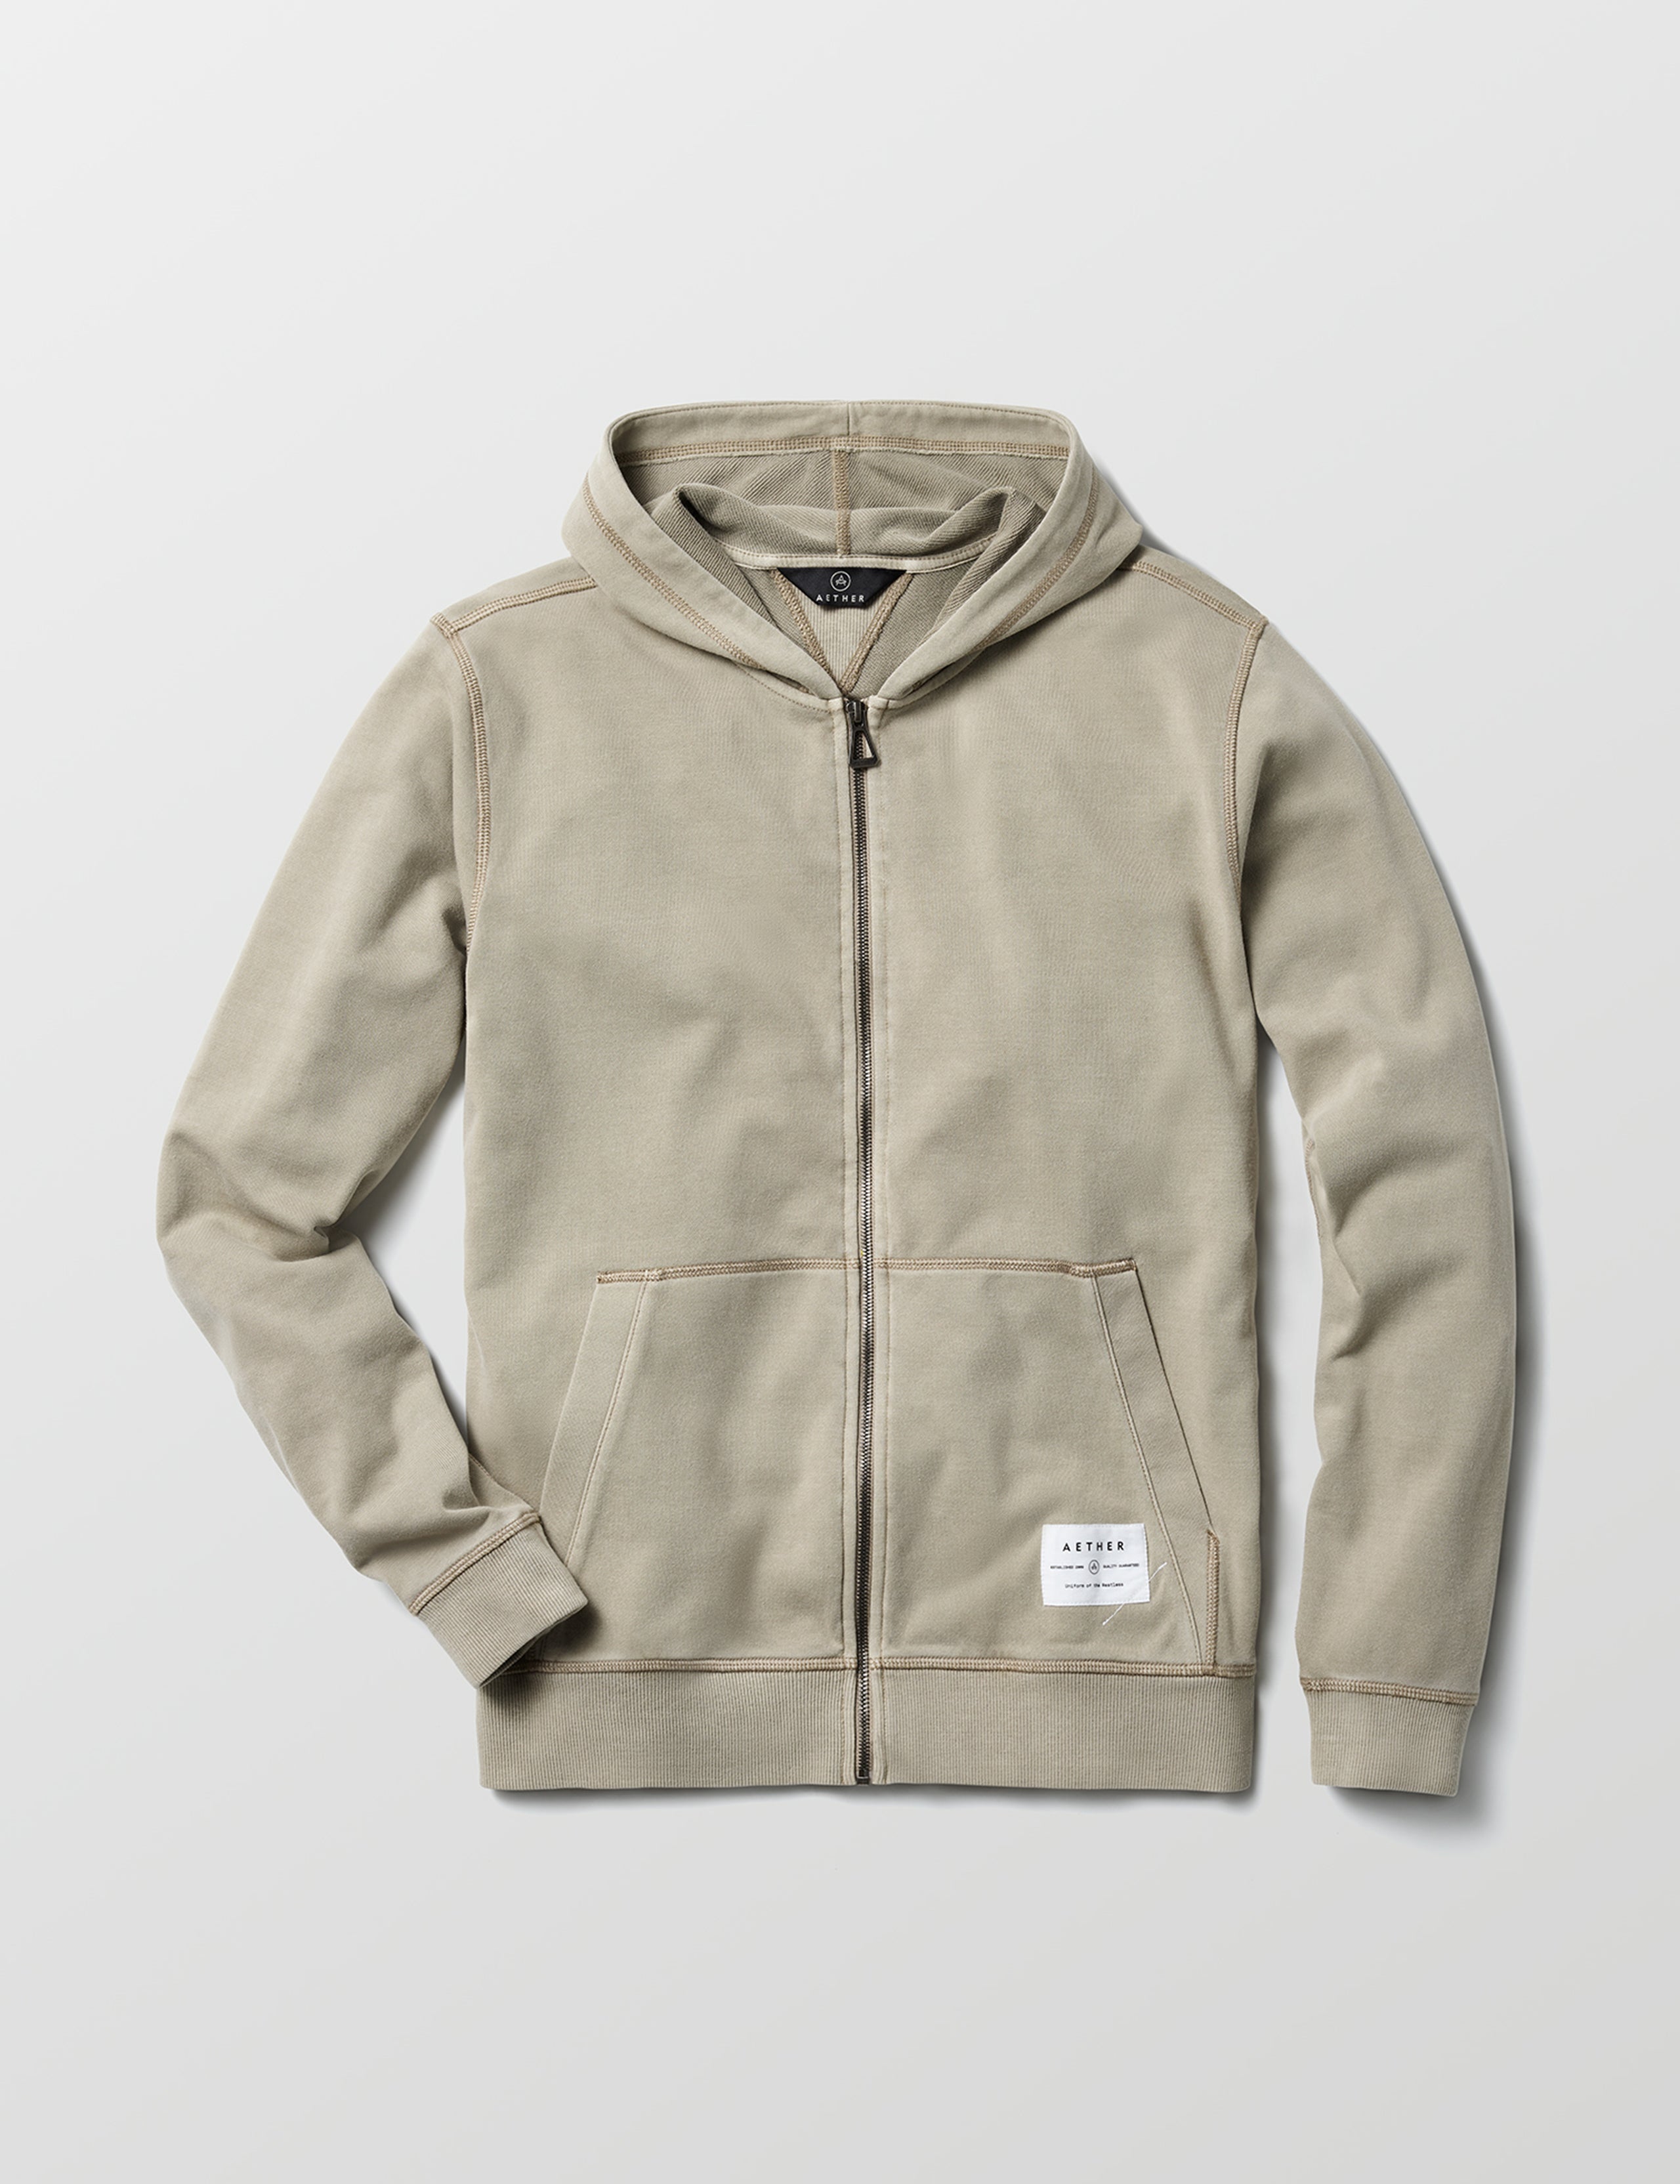 Gray full-zip hoodie from AETHER Apparel